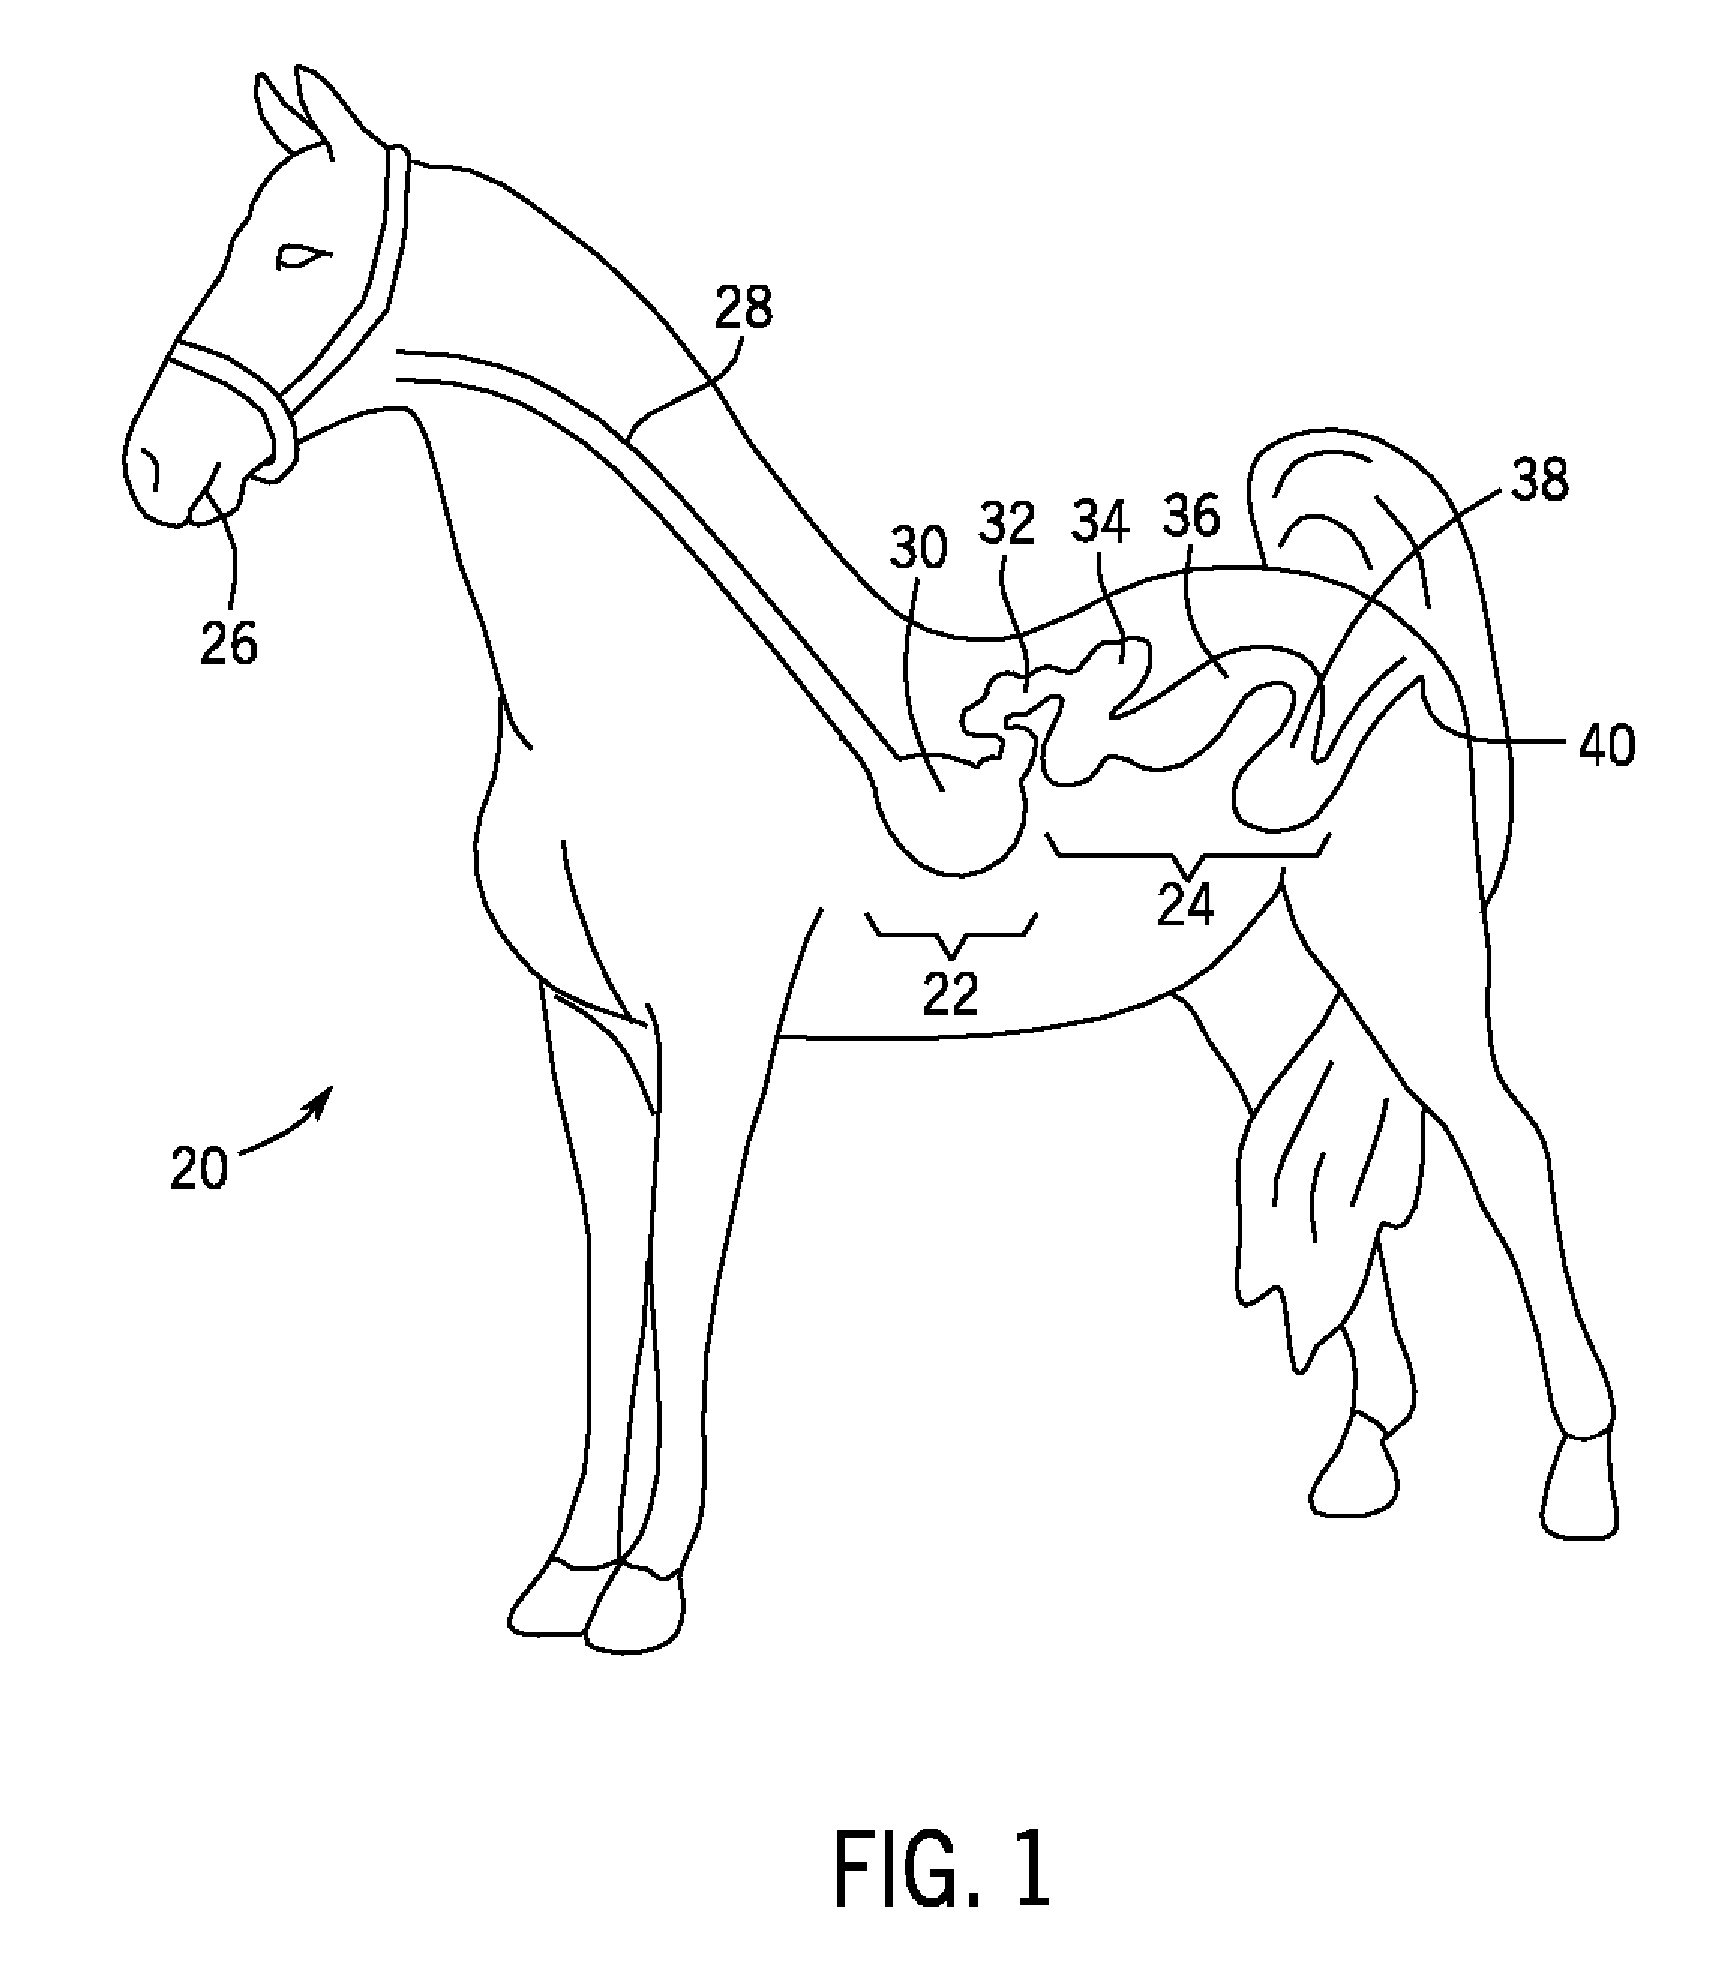 Monoclonal and Polyclonal Antibodies to Equine Albumin and Hemoglobin and Apparatus and Methods Using the Antibodies in the Identification and Localization of Ulcers and Other Digestive Tract Bleeding in Equines